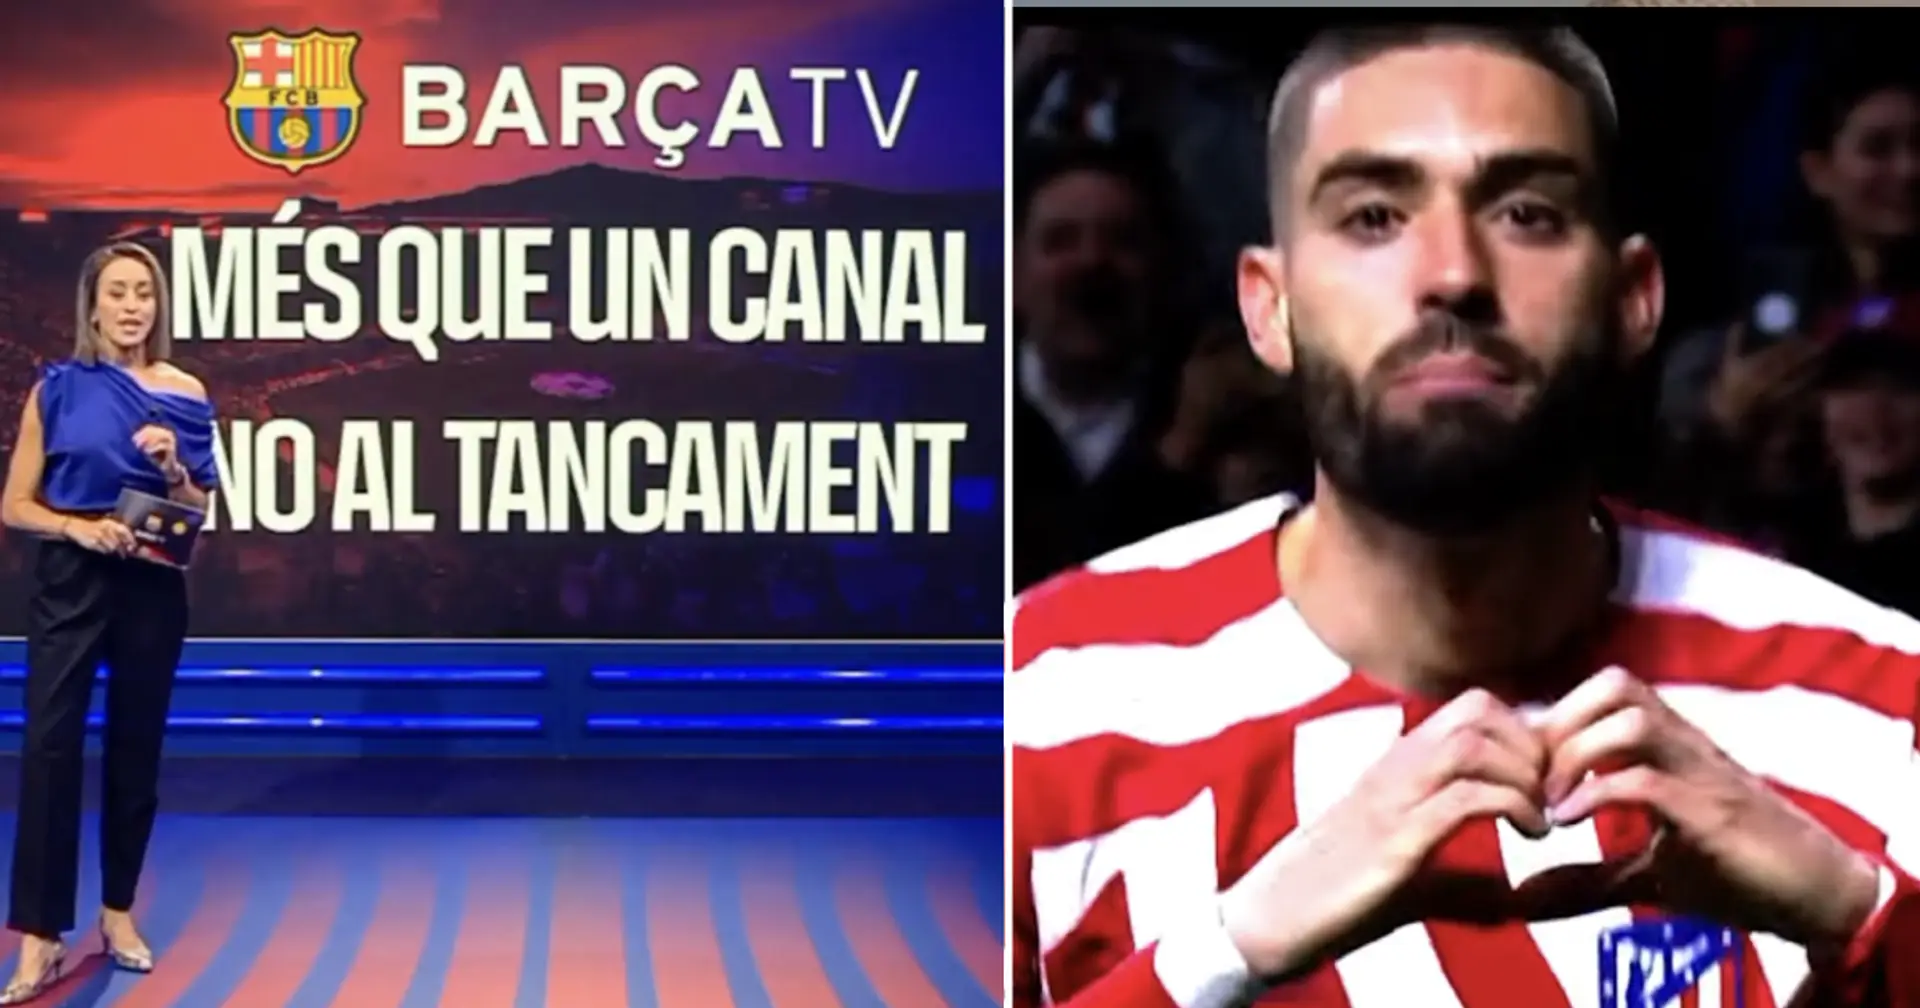 Barca TV shuts down after 24 years on air and 2 other under-radar stories of the day